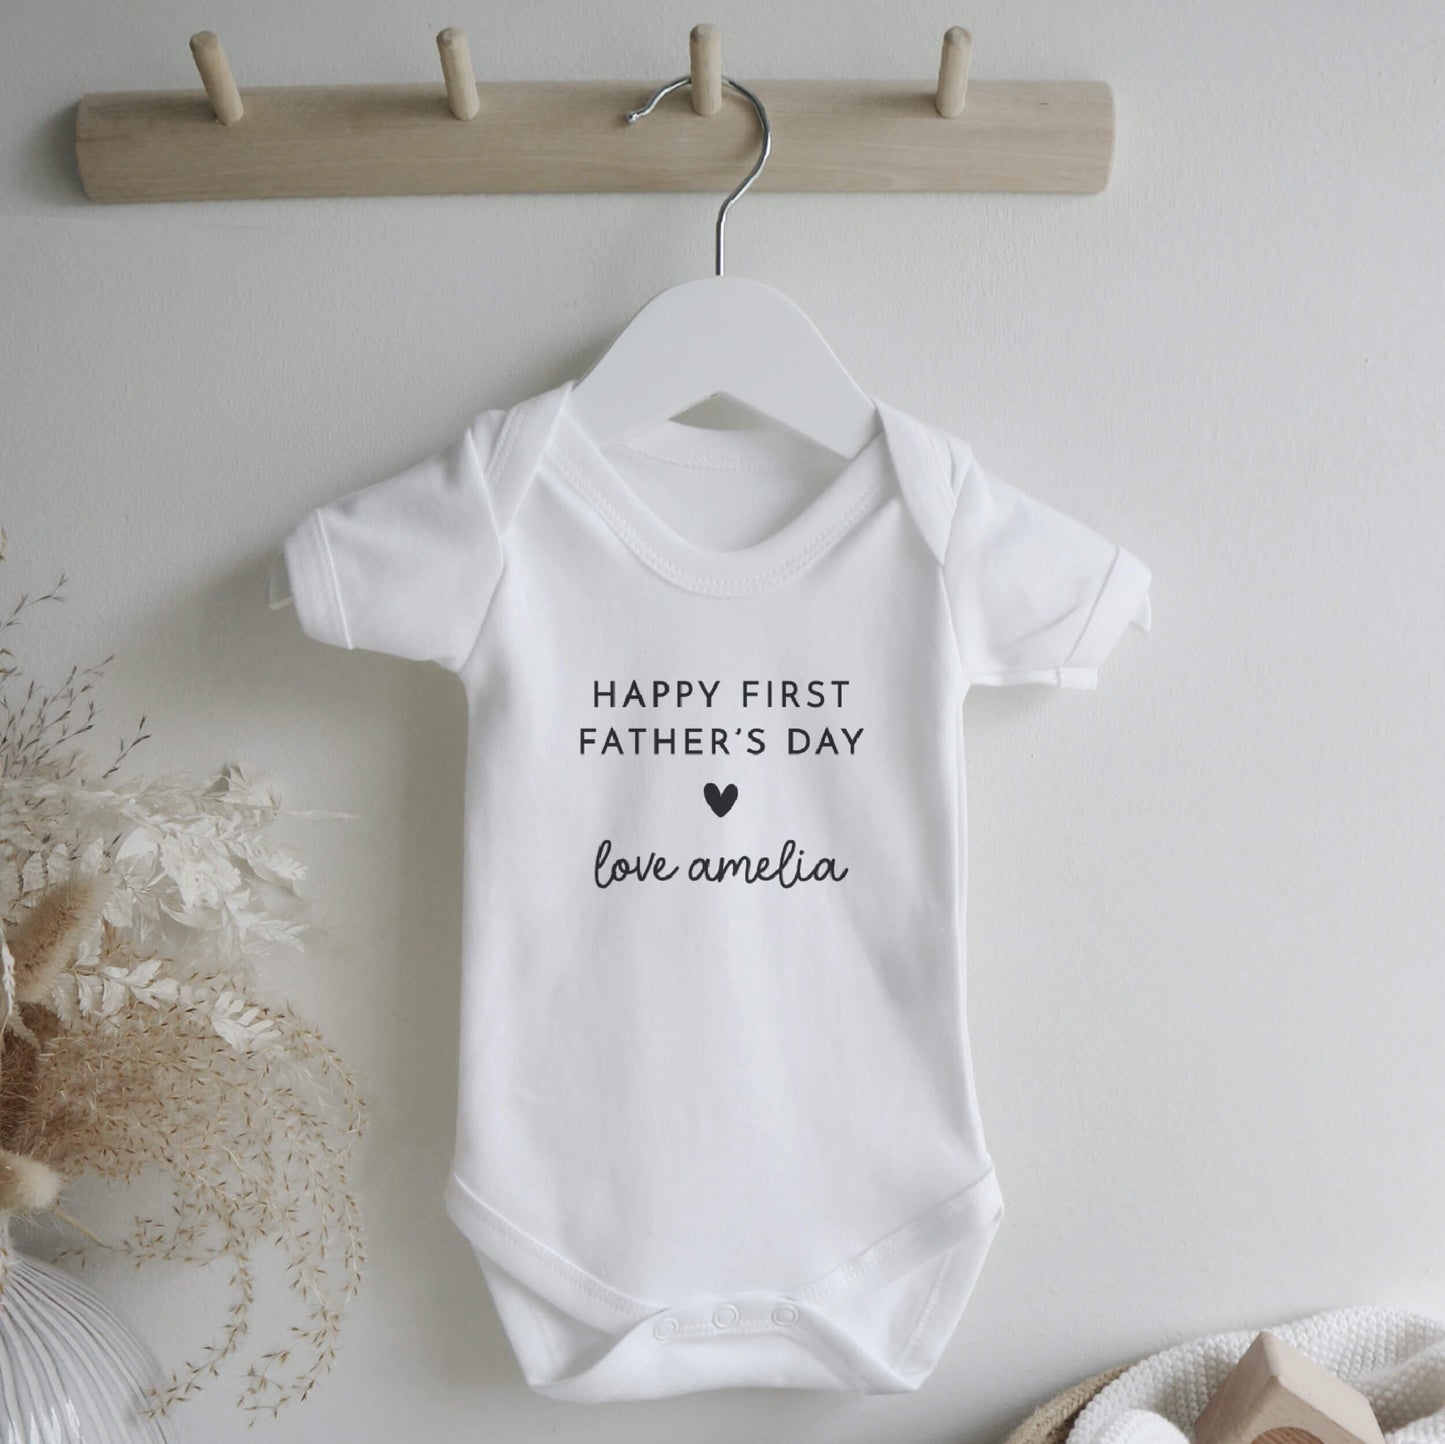 Personalised first father's day bodysuit